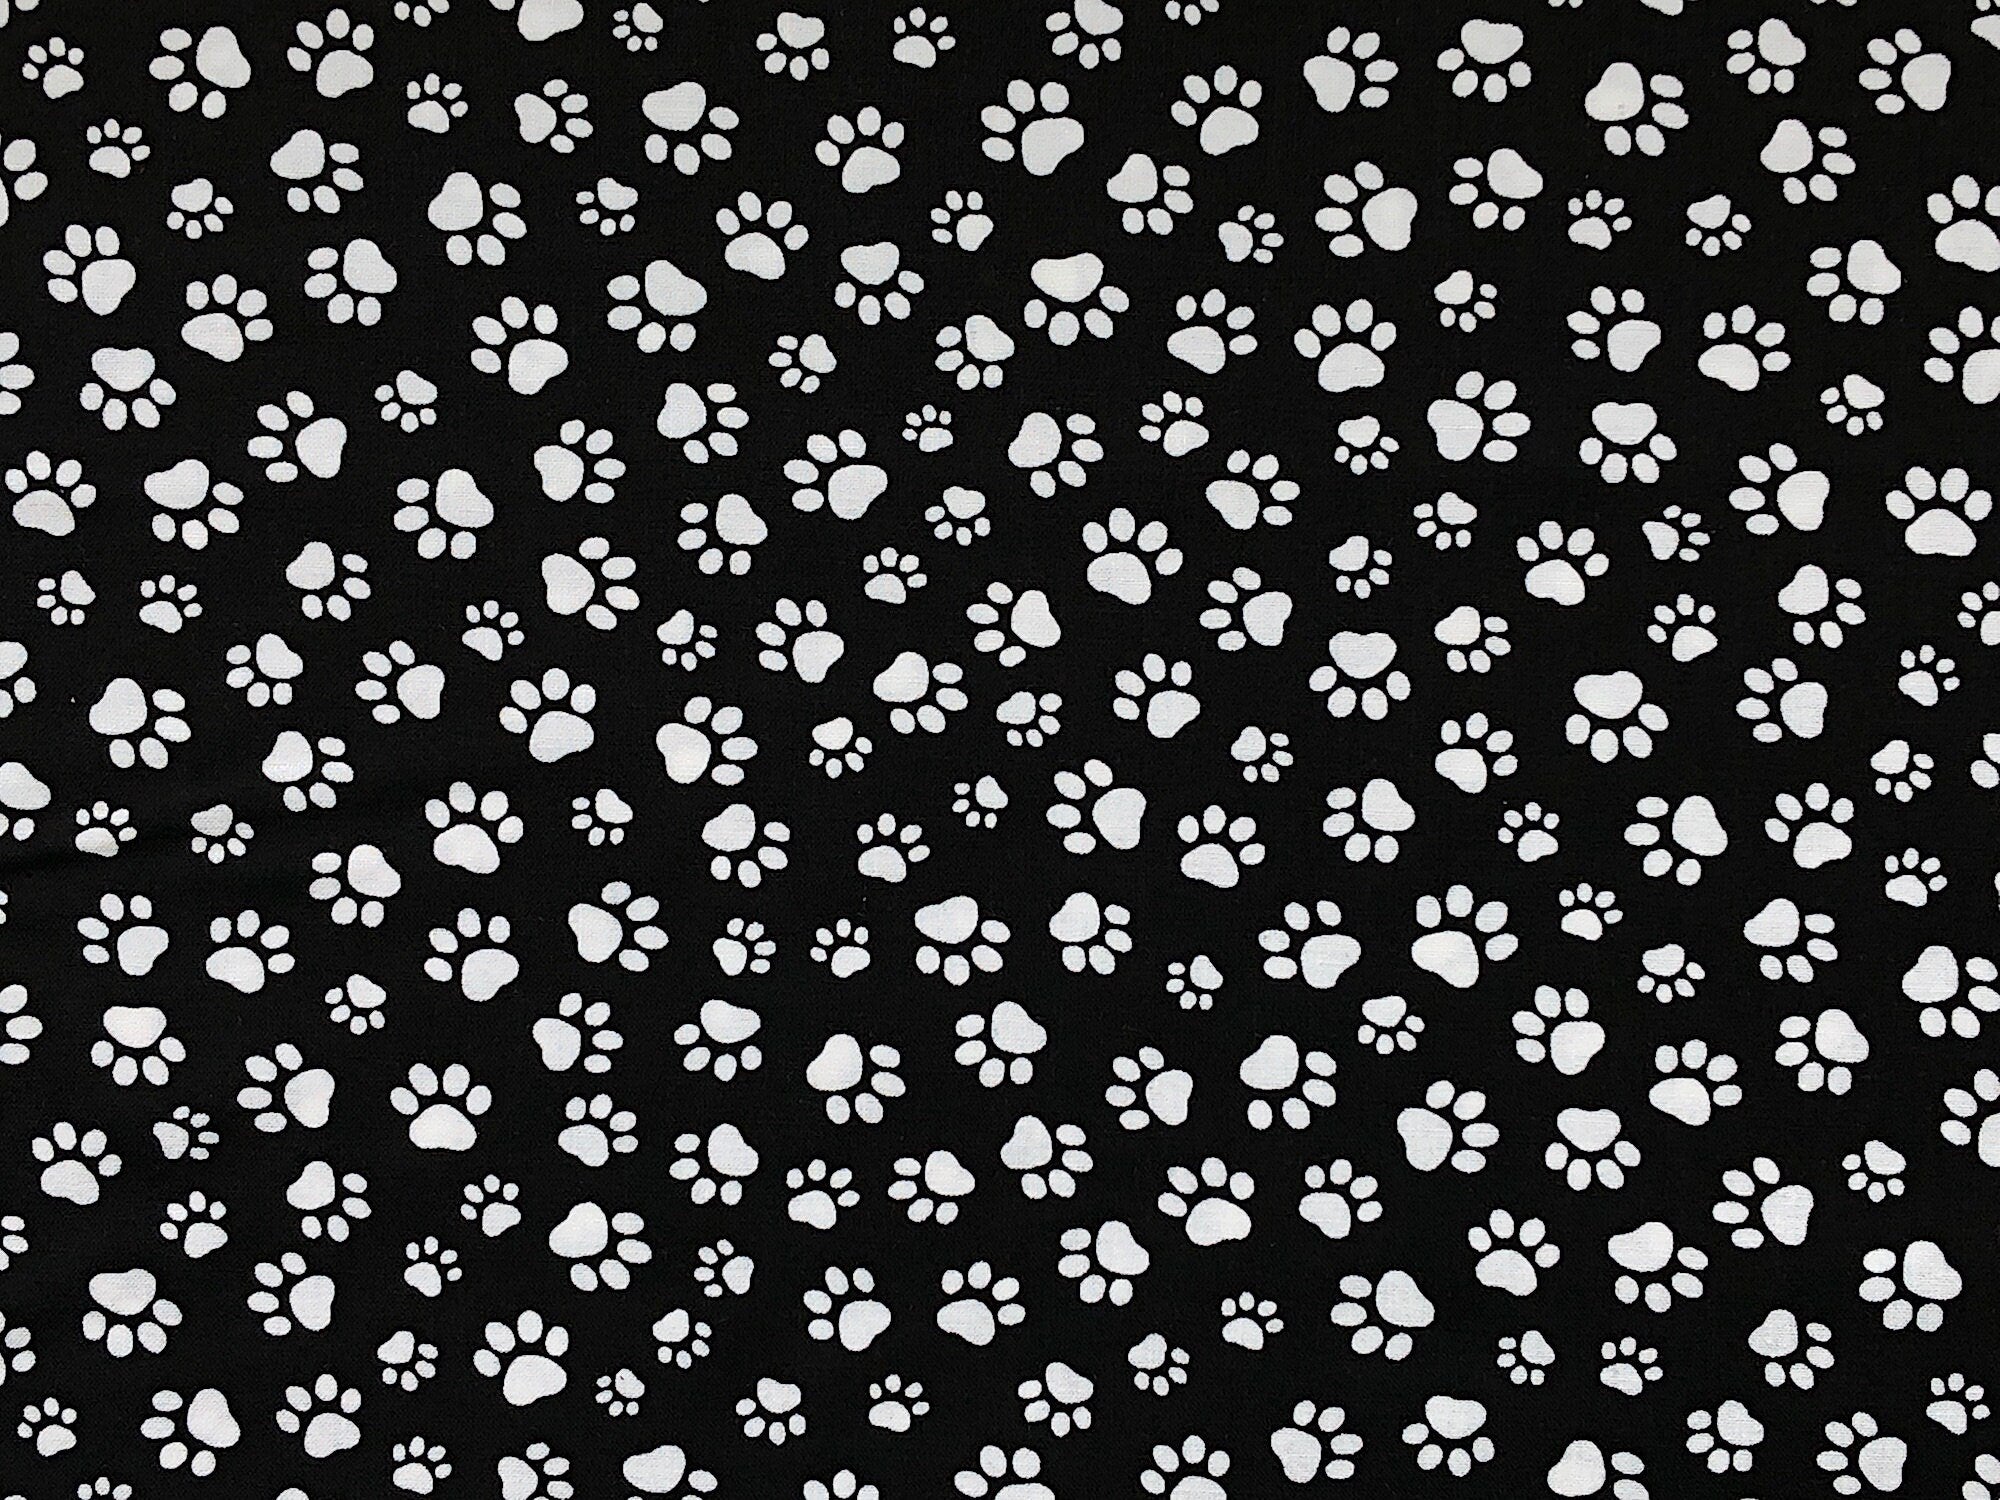 Black cotton fabric covered with white paw prints.